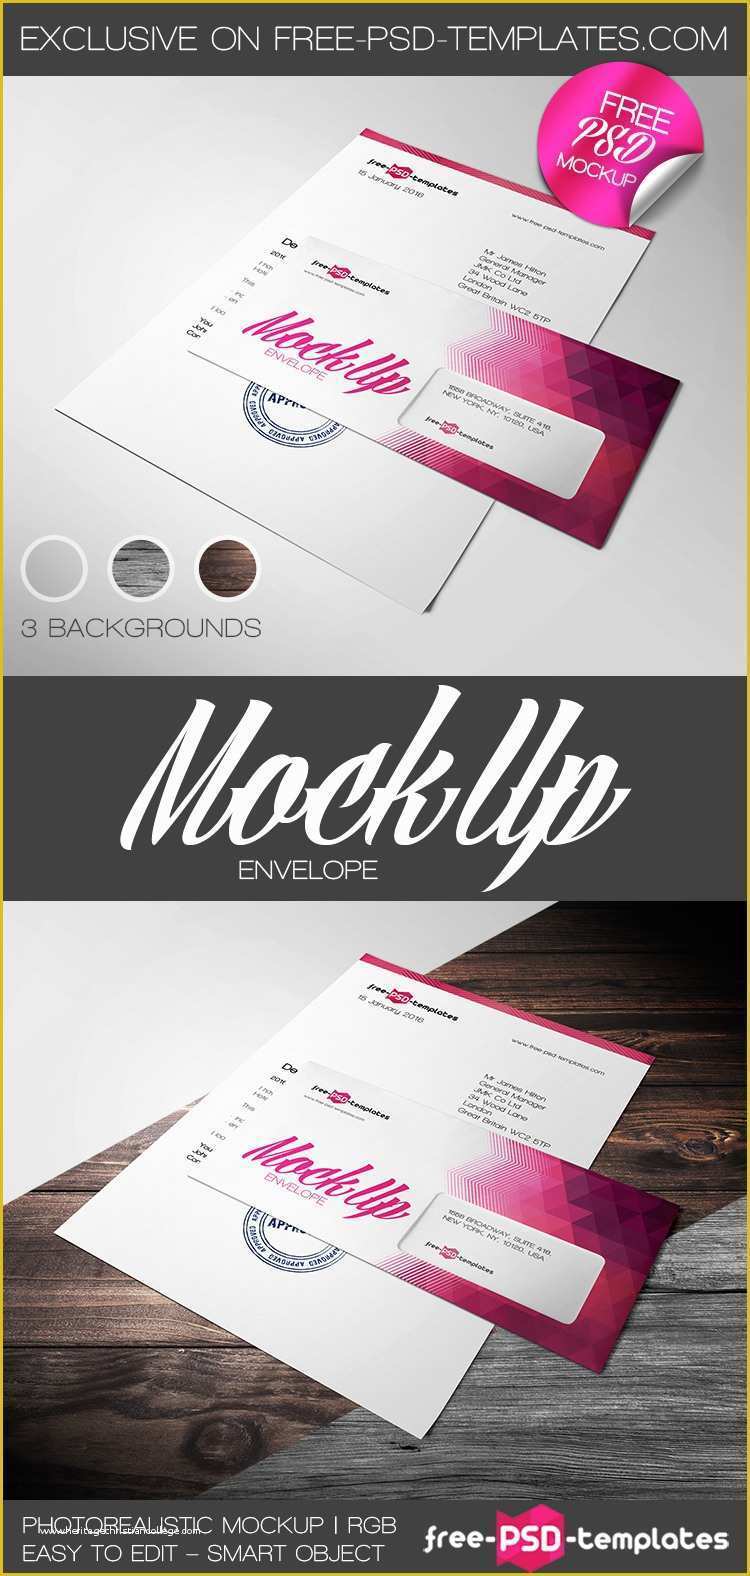 Free Mockup Templates Of Free Envelope Mock Up In Psd